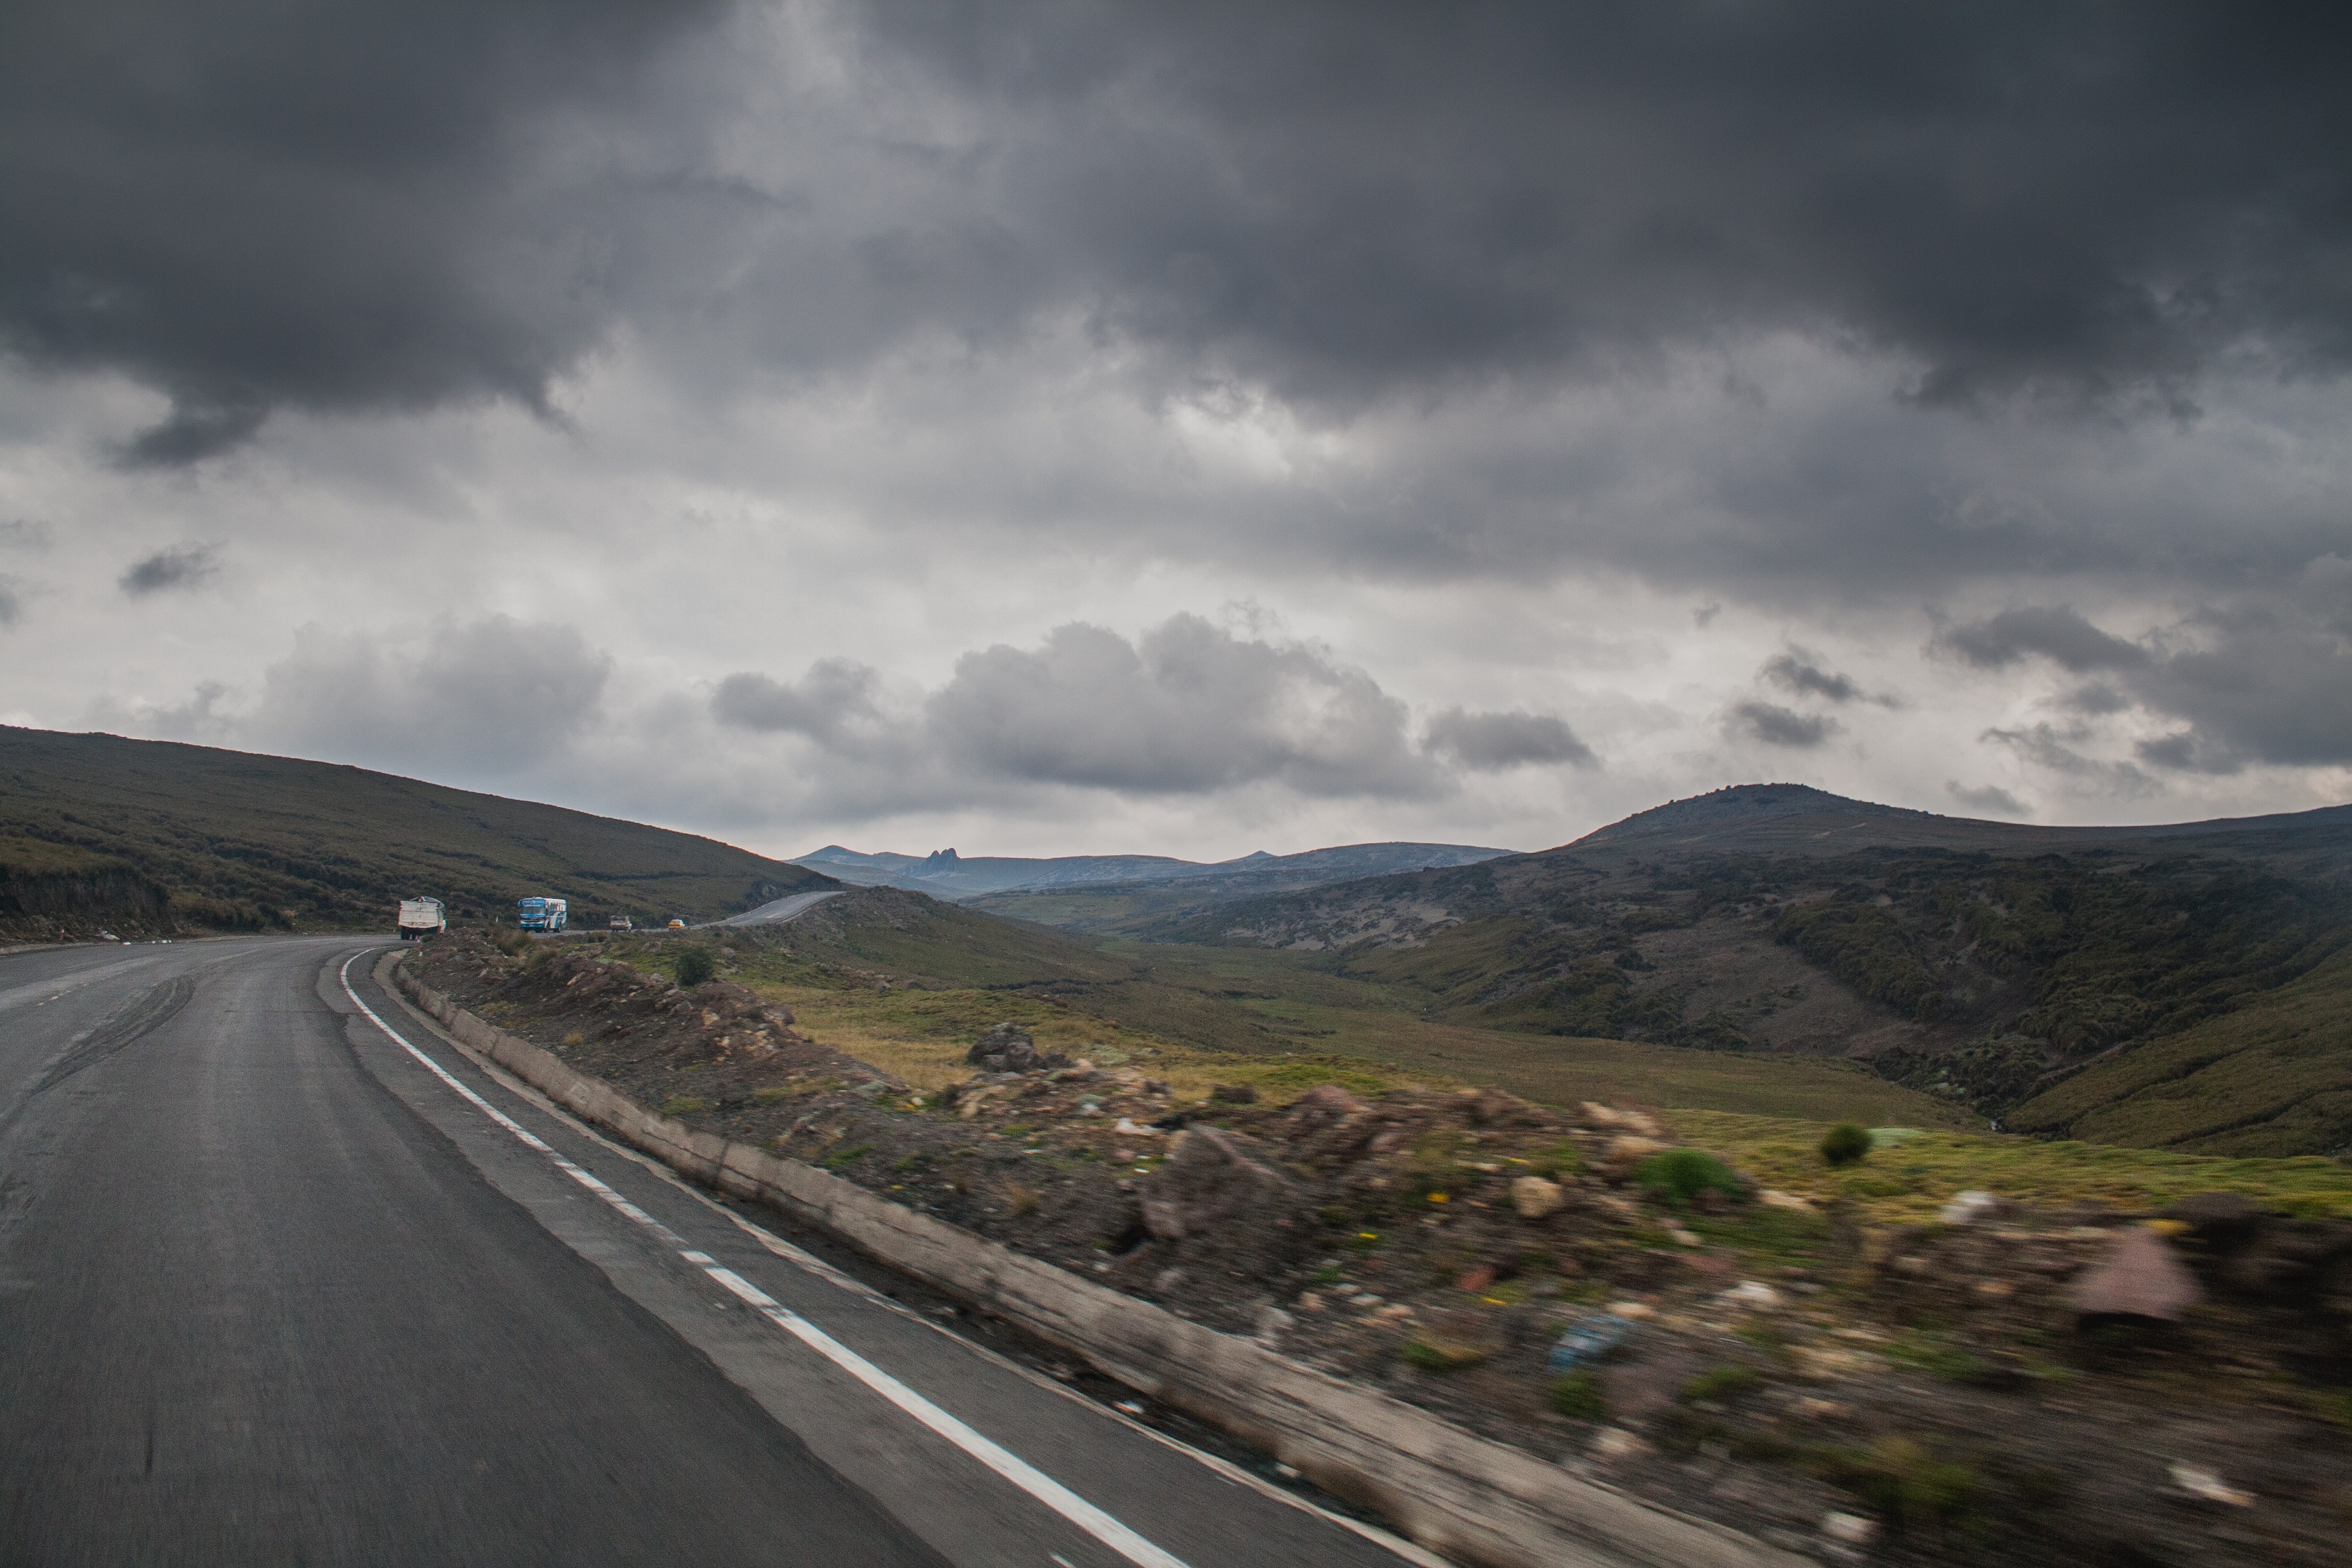 Road near brown stone during cloudy photo